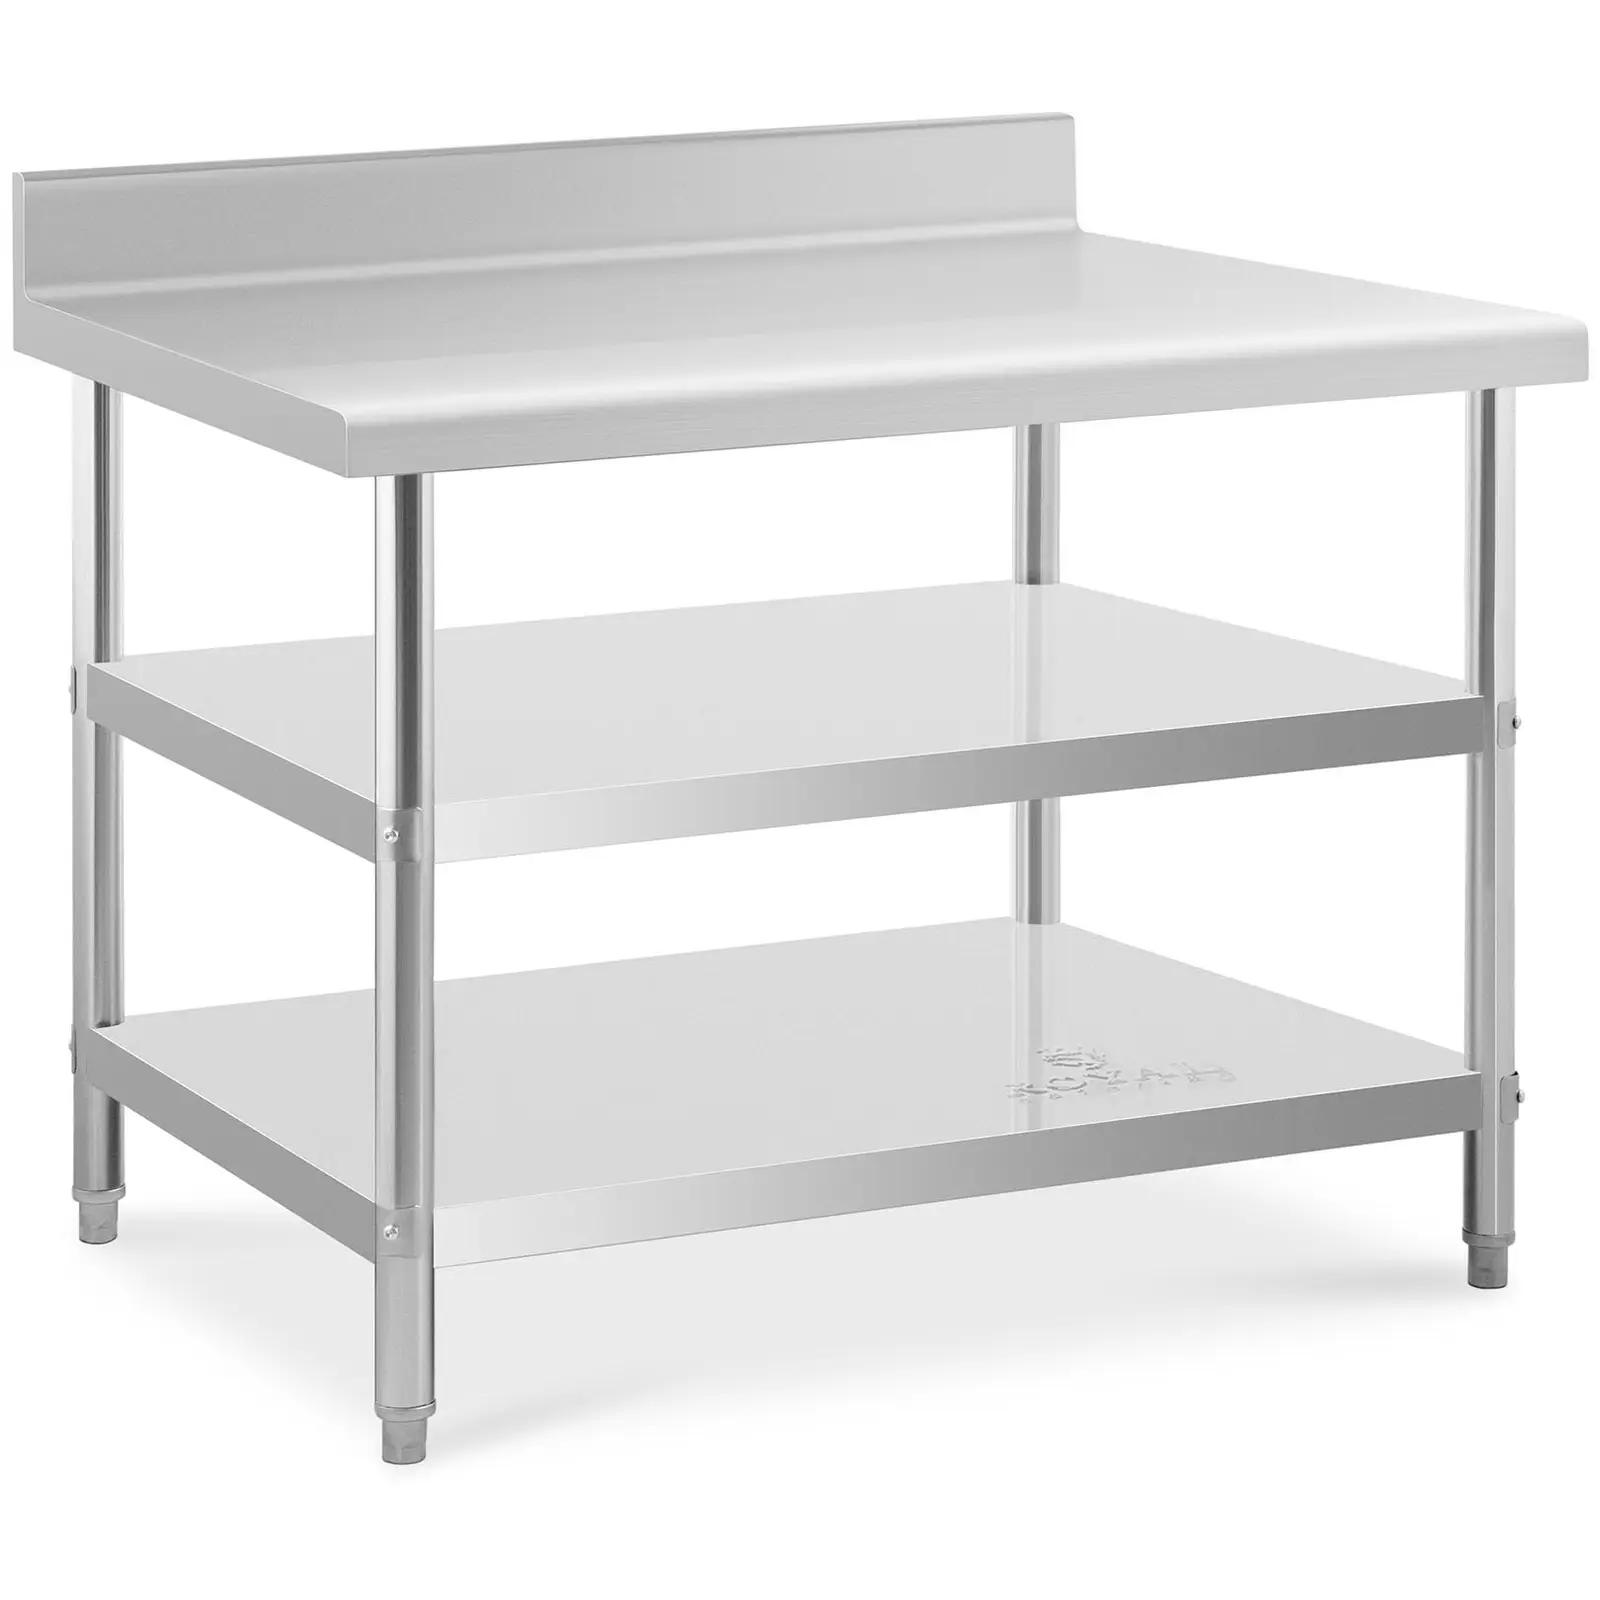 Stainless Steel Work Table with upstand - 120 x 90 x 16.5 cm - 219 kg - 2 shelves - Royal Catering